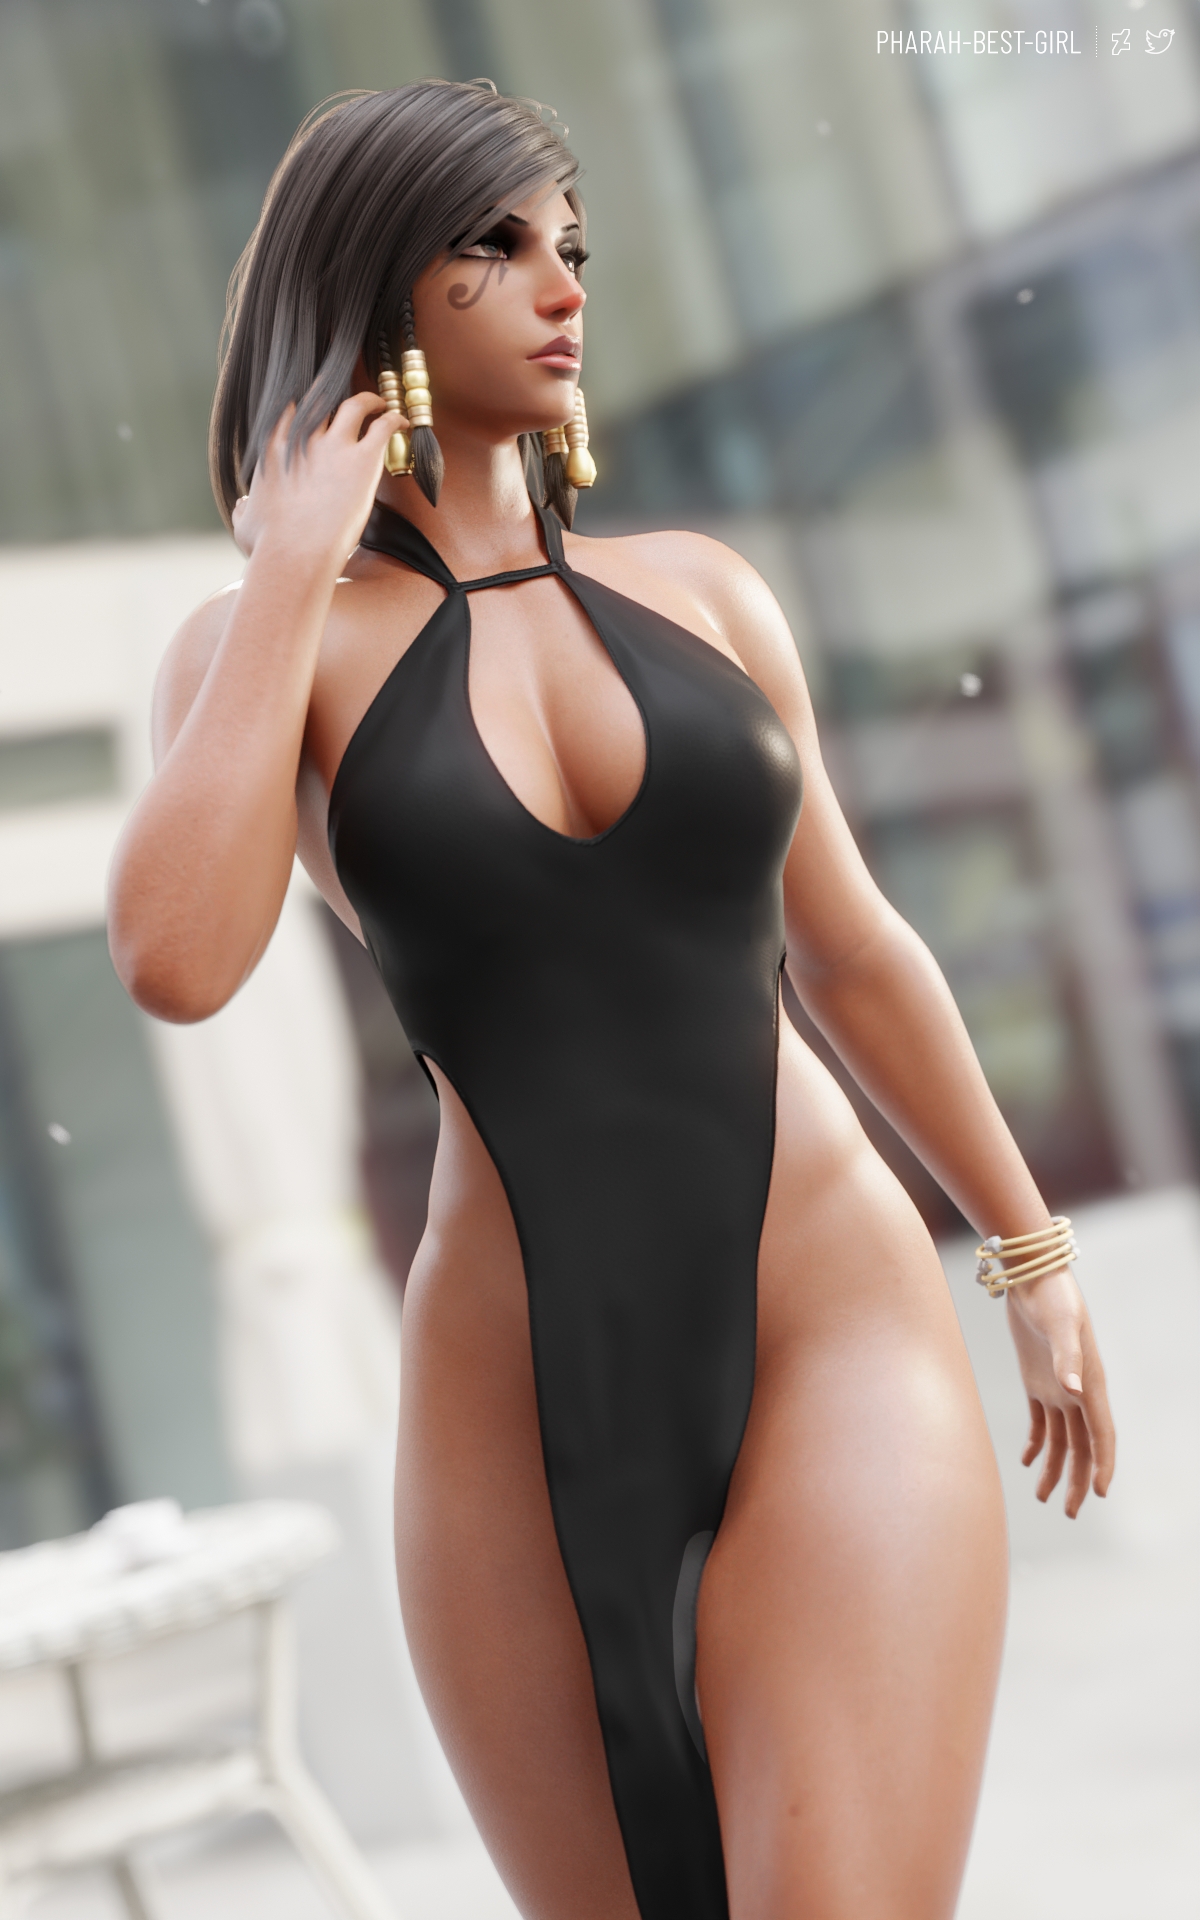 Pinup 121 Pharah Pharah (overwatch) Overwatch Muscular Girl Muscles Muscular Sporty Sport Tanlines Pubic Hair 5